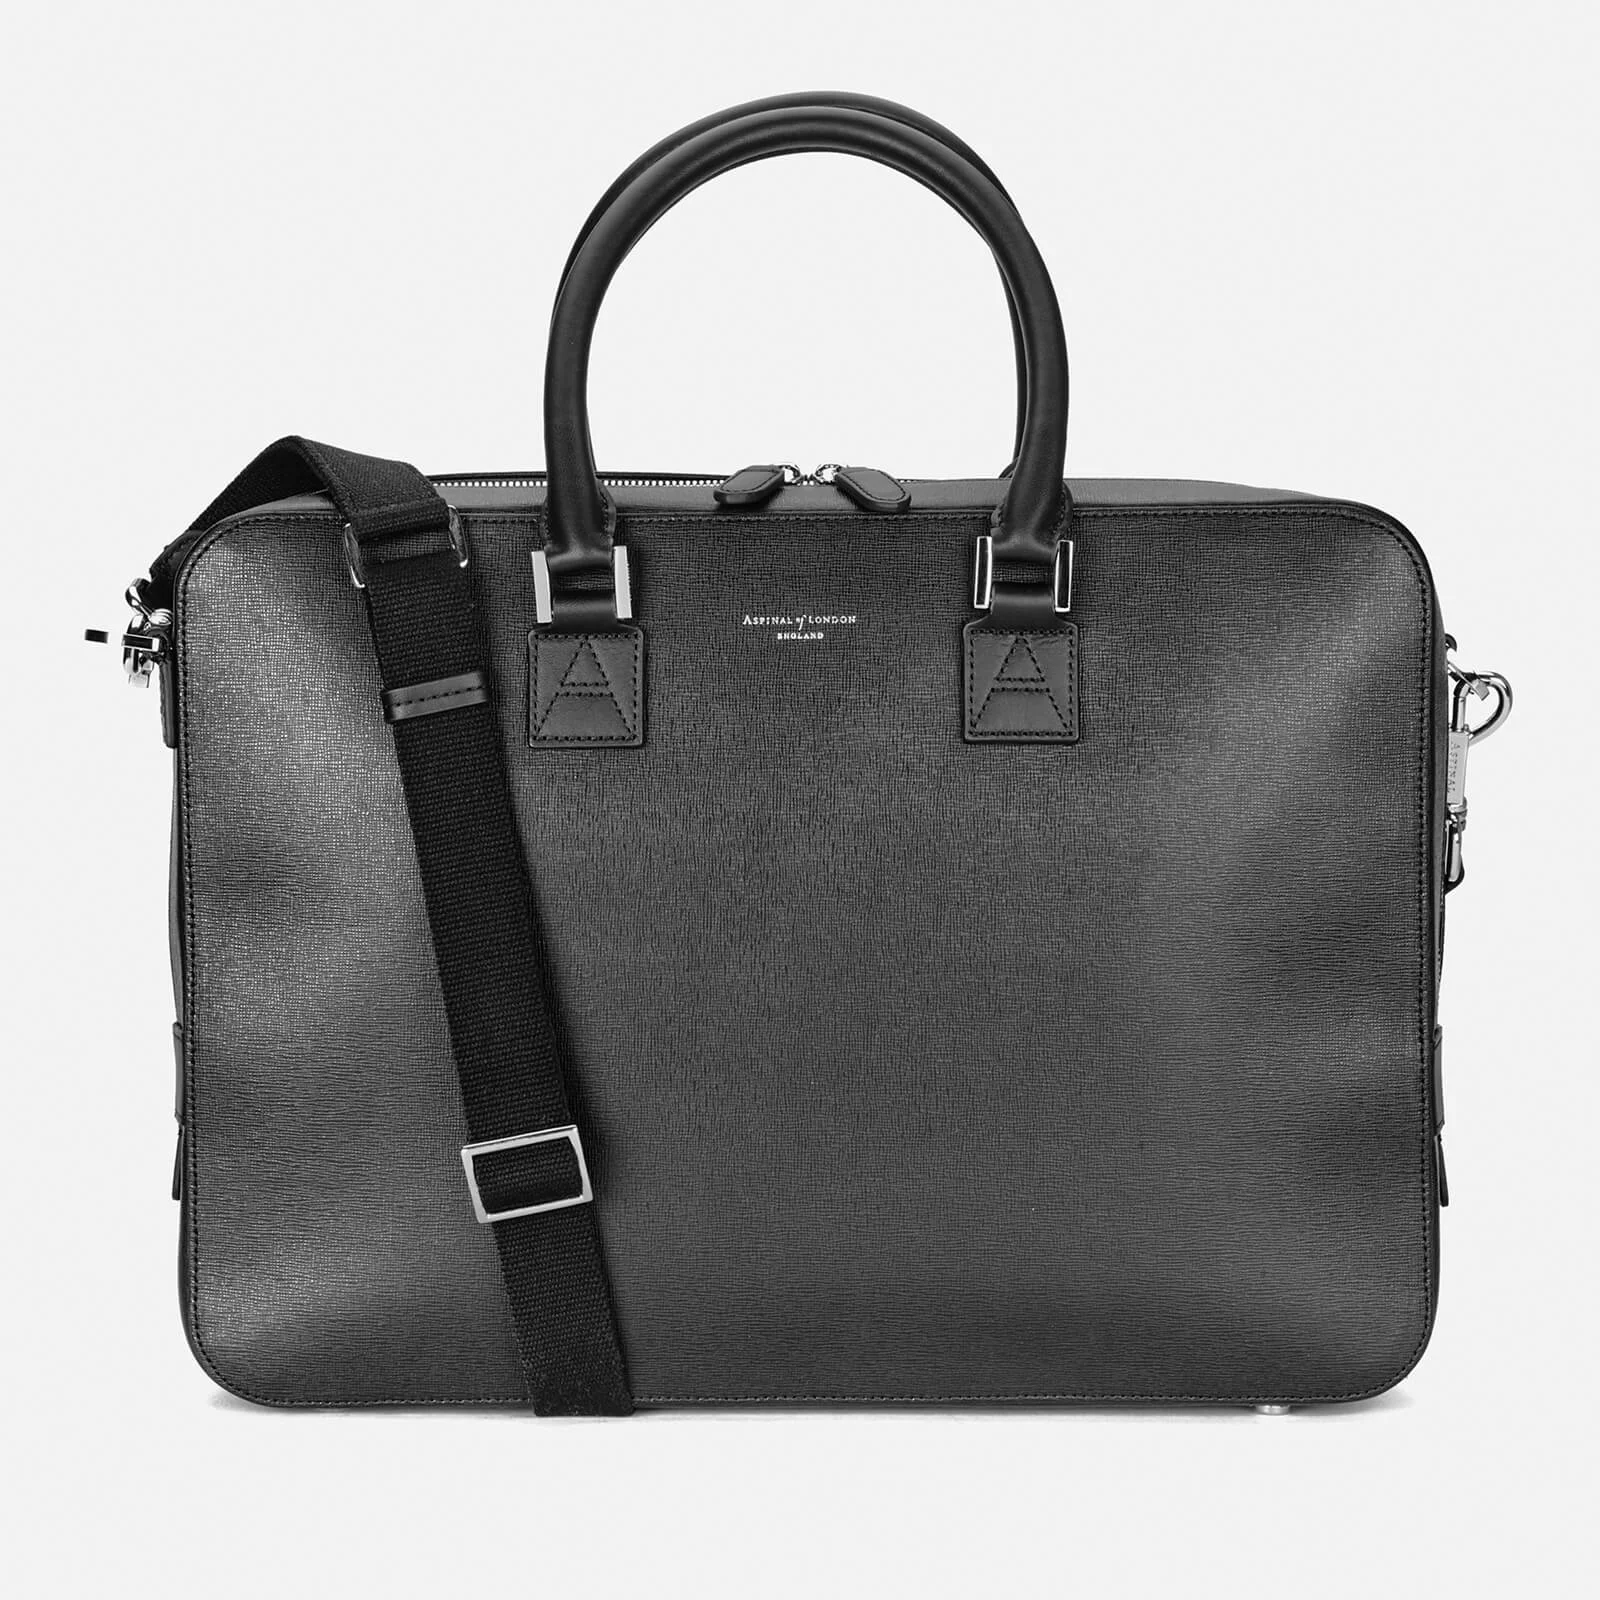 Aspinal of London Men's Mount Street Small Briefcase - Black Image 1